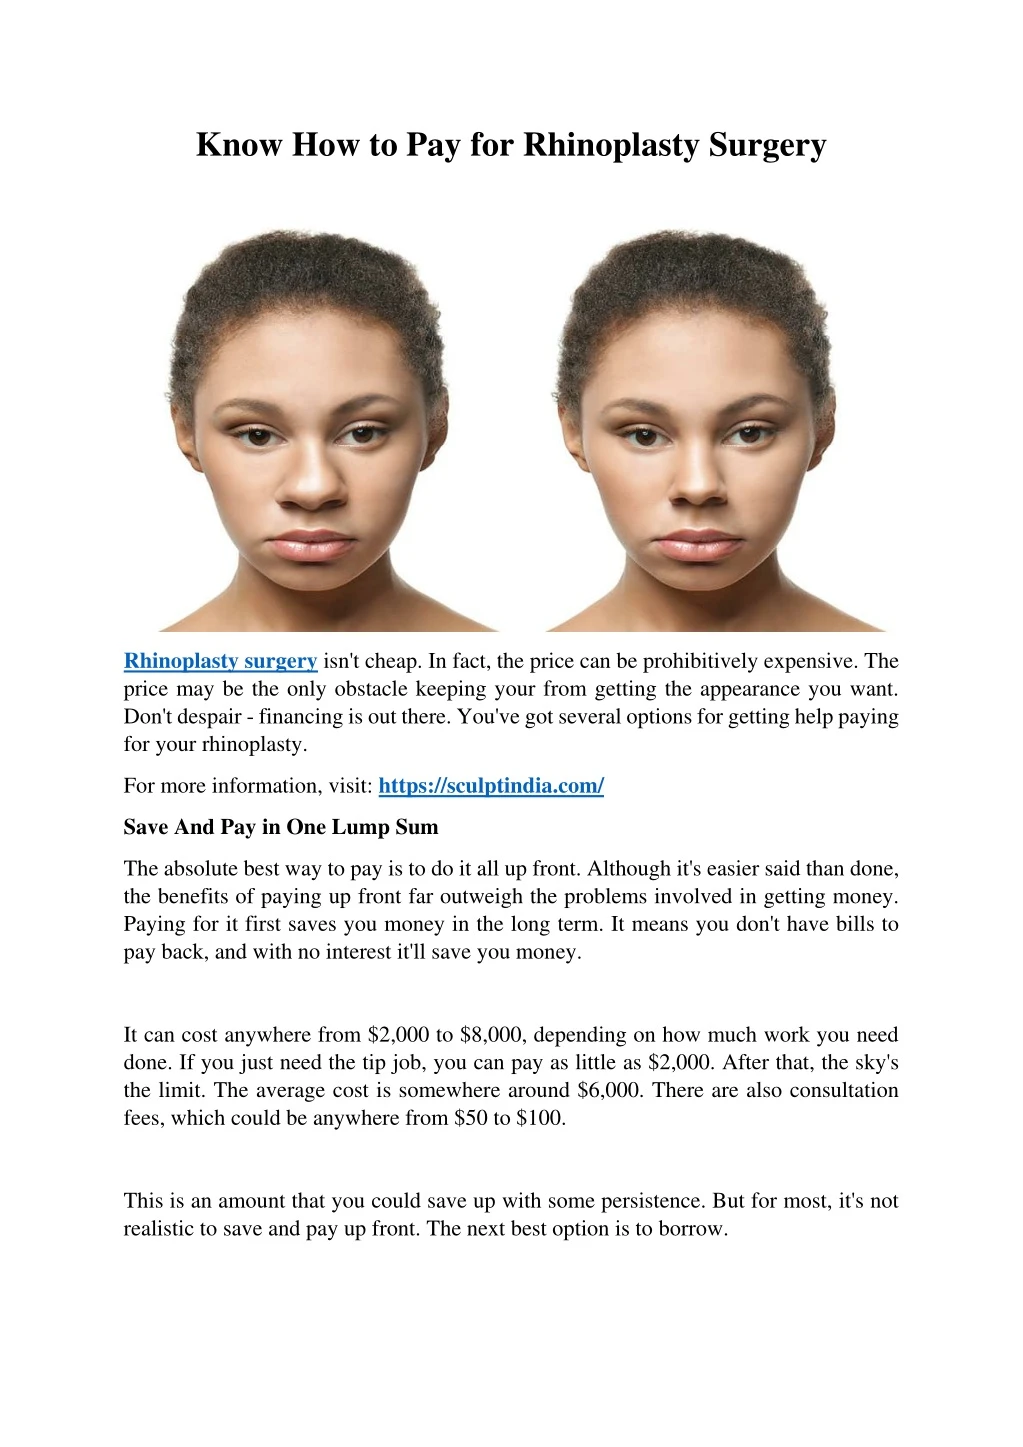 know how to pay for rhinoplasty surgery